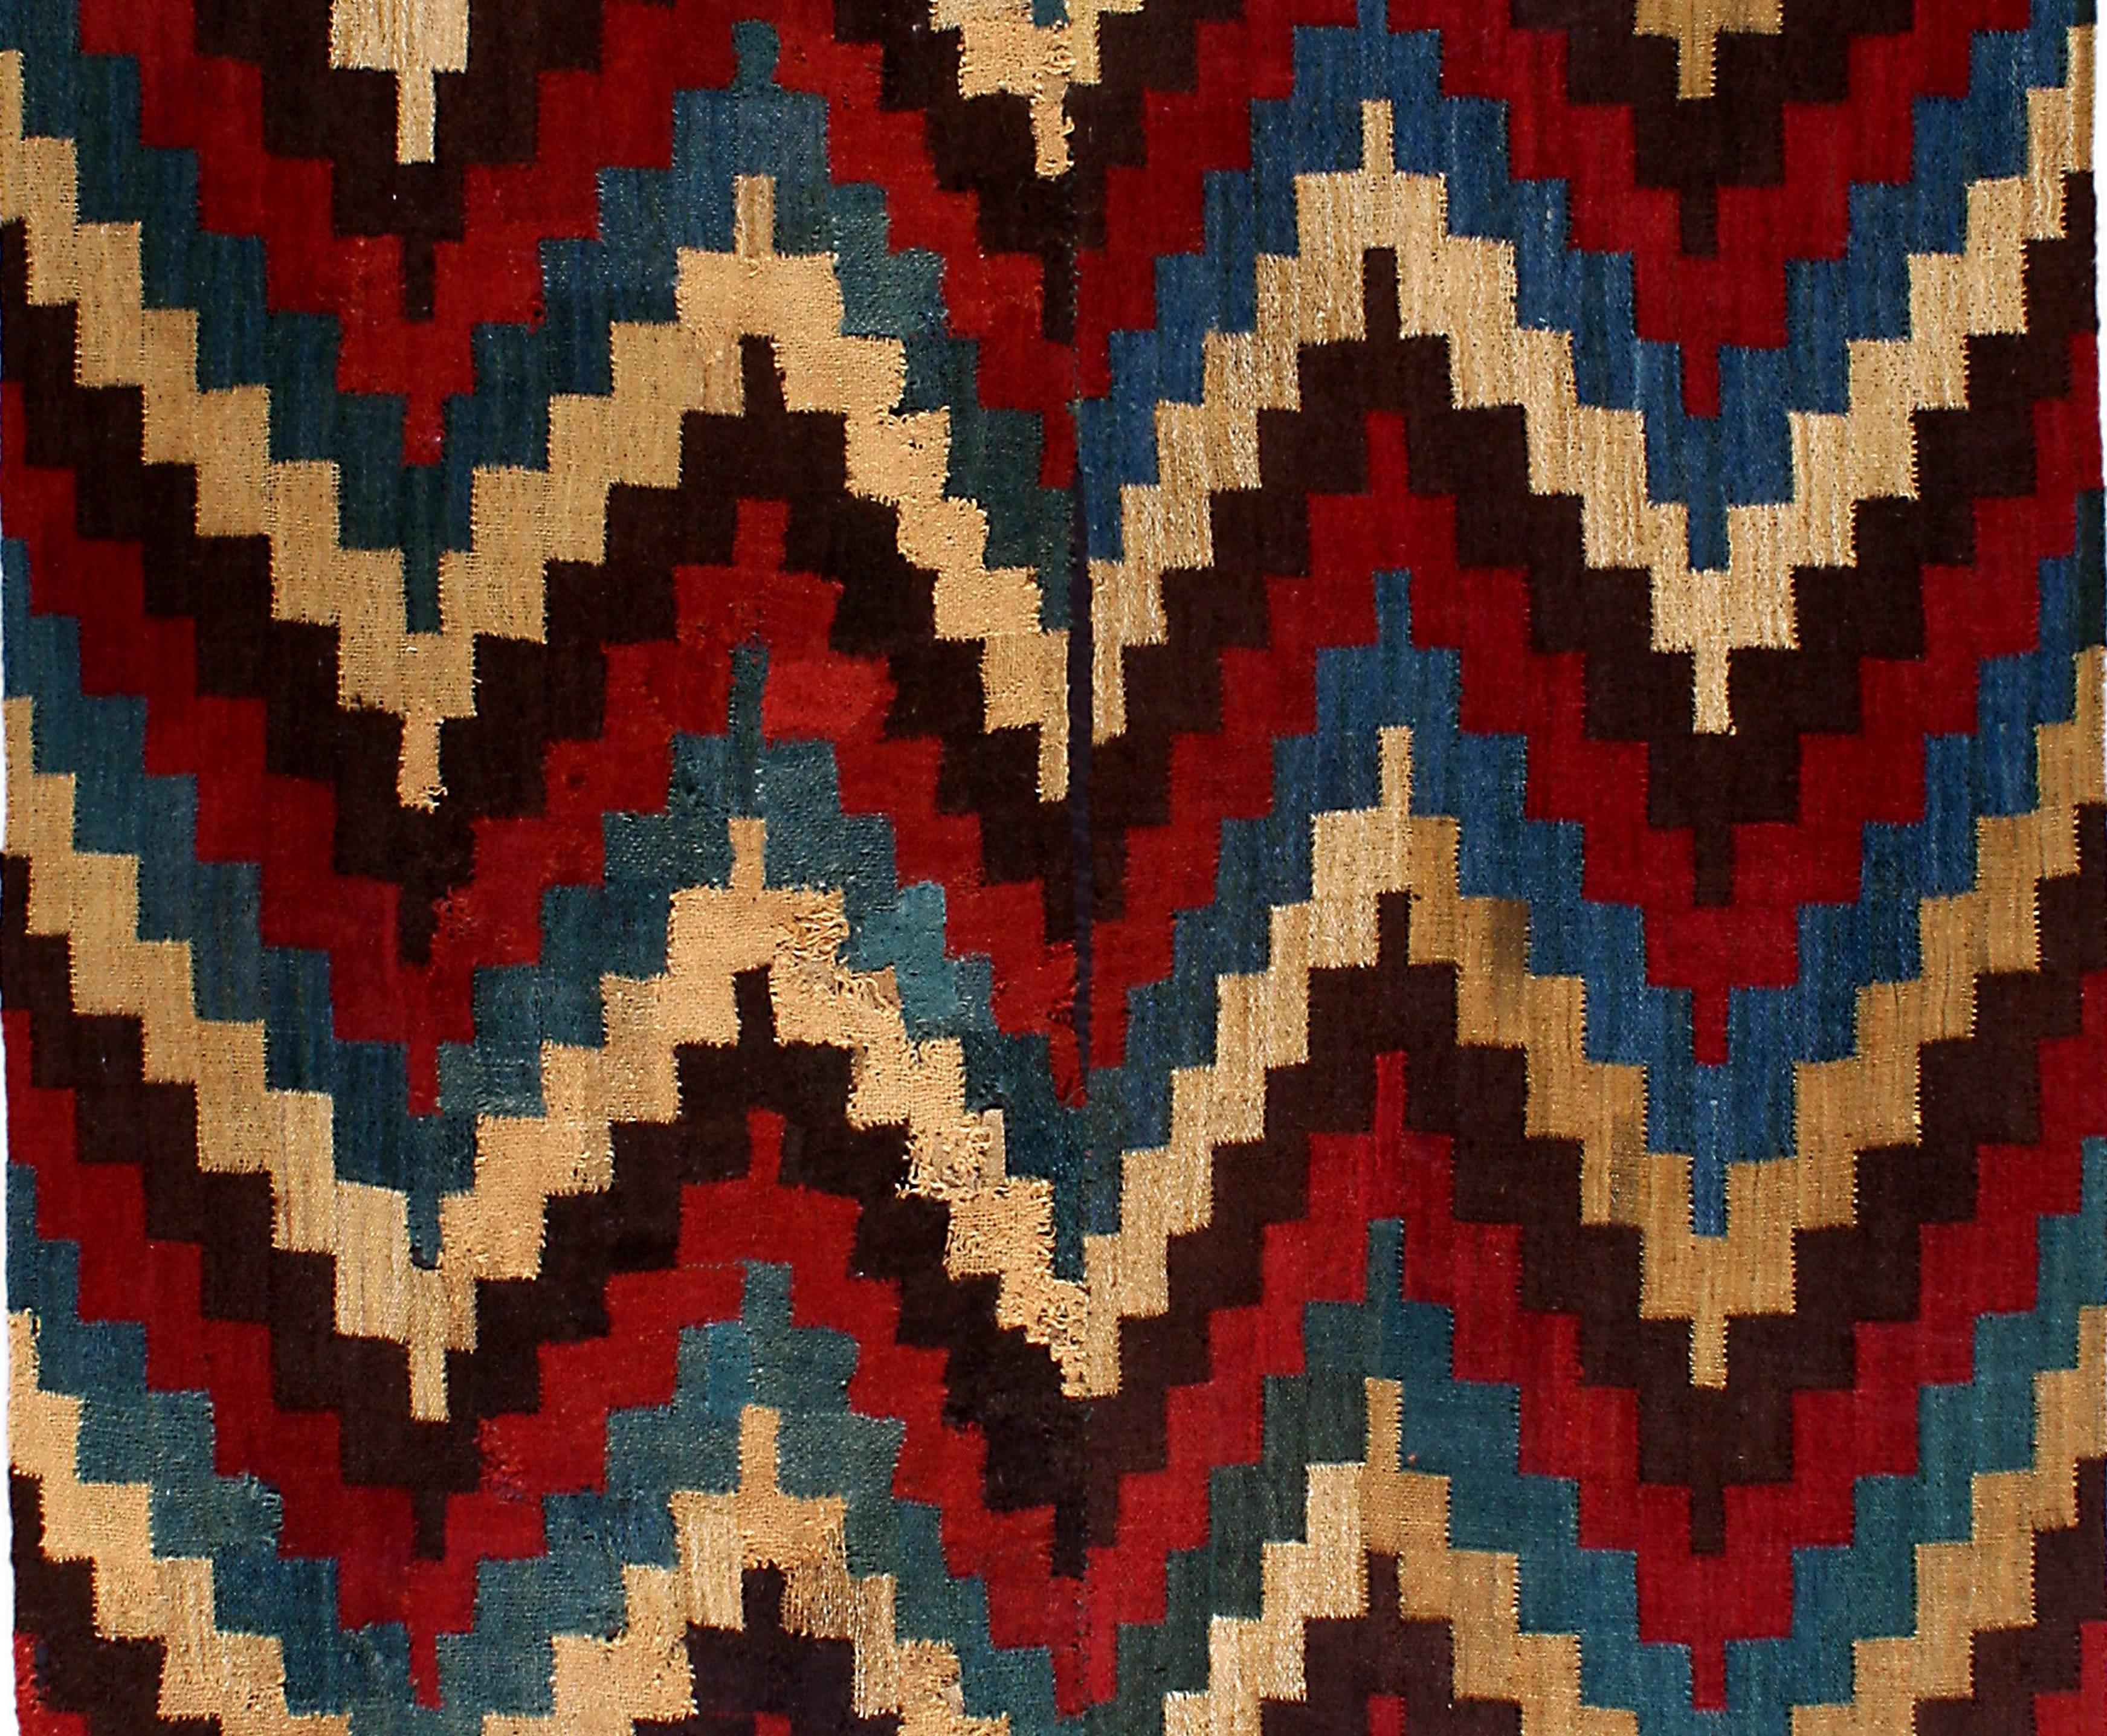 Magnificent Pre-Columbian Nazca Textile Poncho with a Geometric Step Design in Vibrant Ochre, Red, Green and Brown colors with its Original Fringes. Mounted and sealed in Plexiglass.

Provenance: From the Collection of Guillot Munoz

Additional